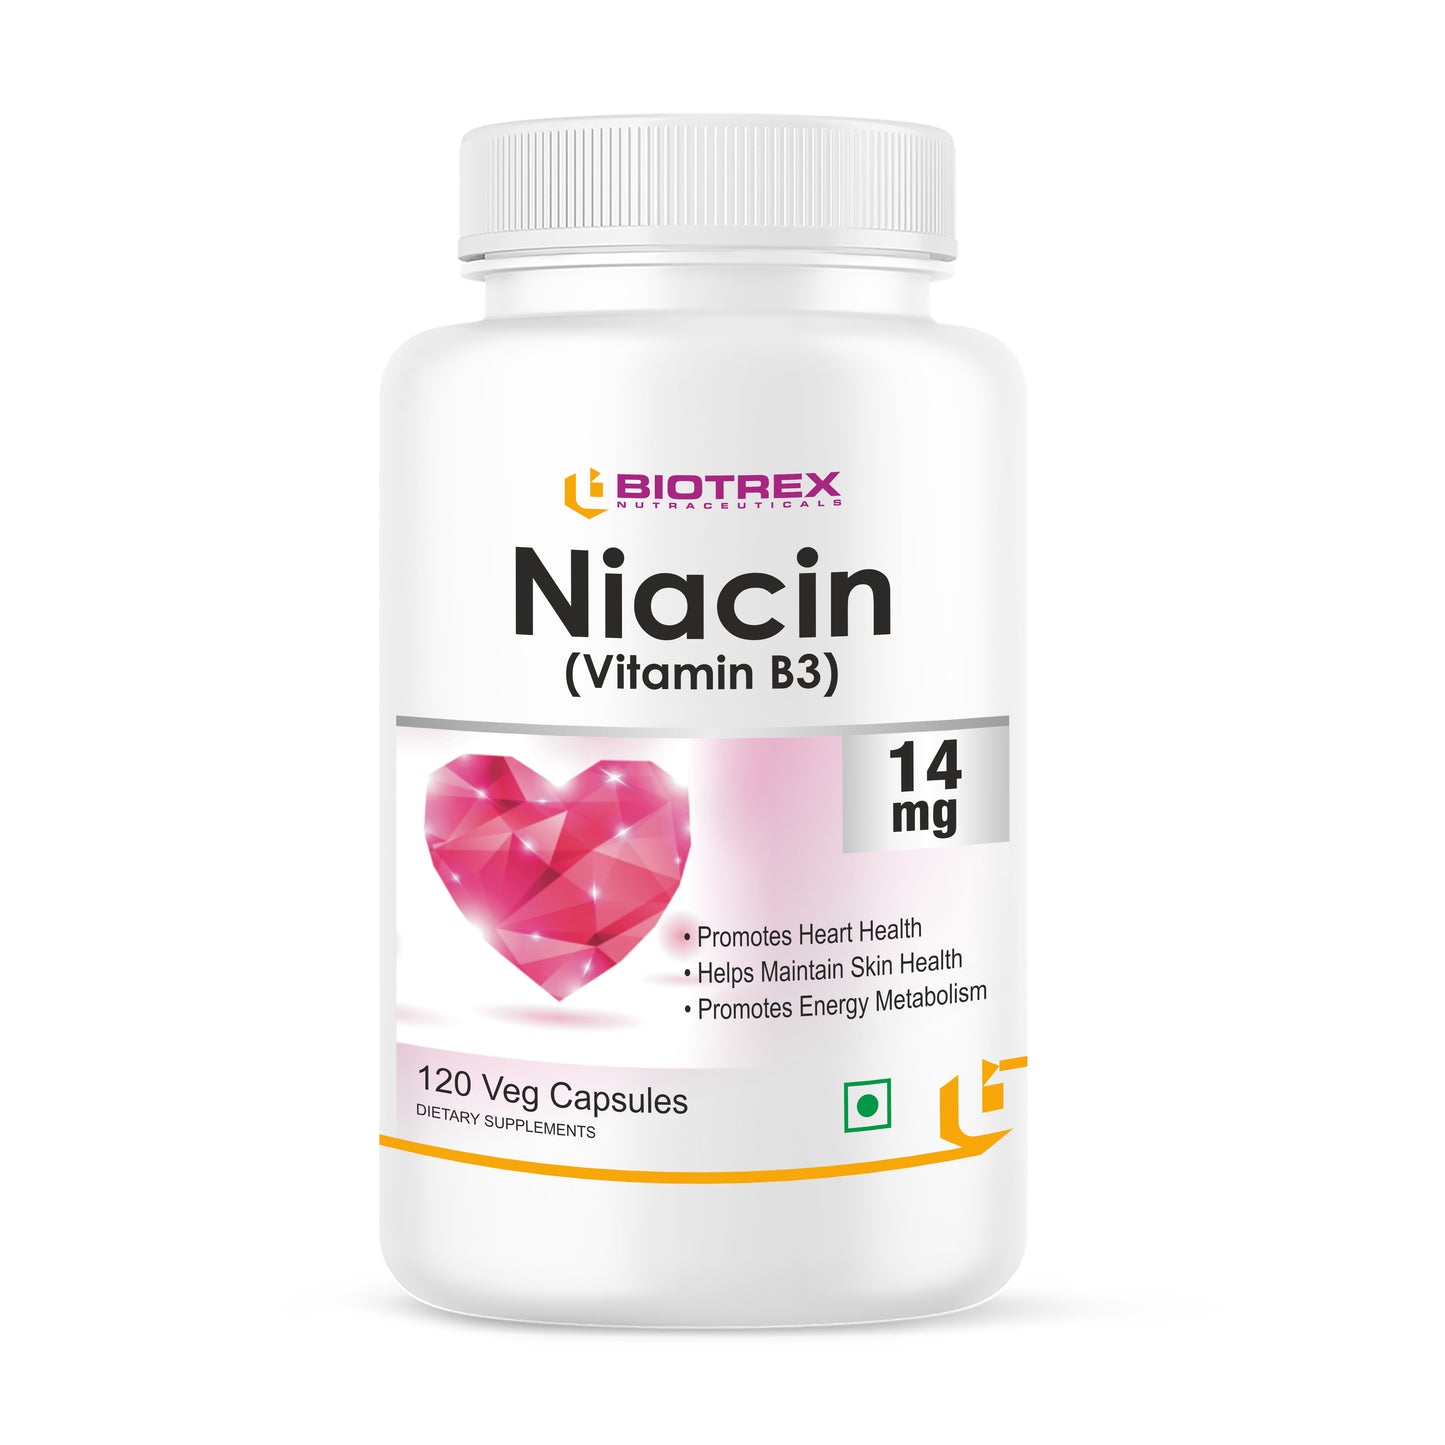 Biotrex Nutraceuticals Niacin 14mg Vitamin B3 With Inositol 50mg Supplement | for Vascularity & Increase Cellular Energy, Non-GMO, Gluten Free, As Per RDA Allowance - 120 Veg Capsules